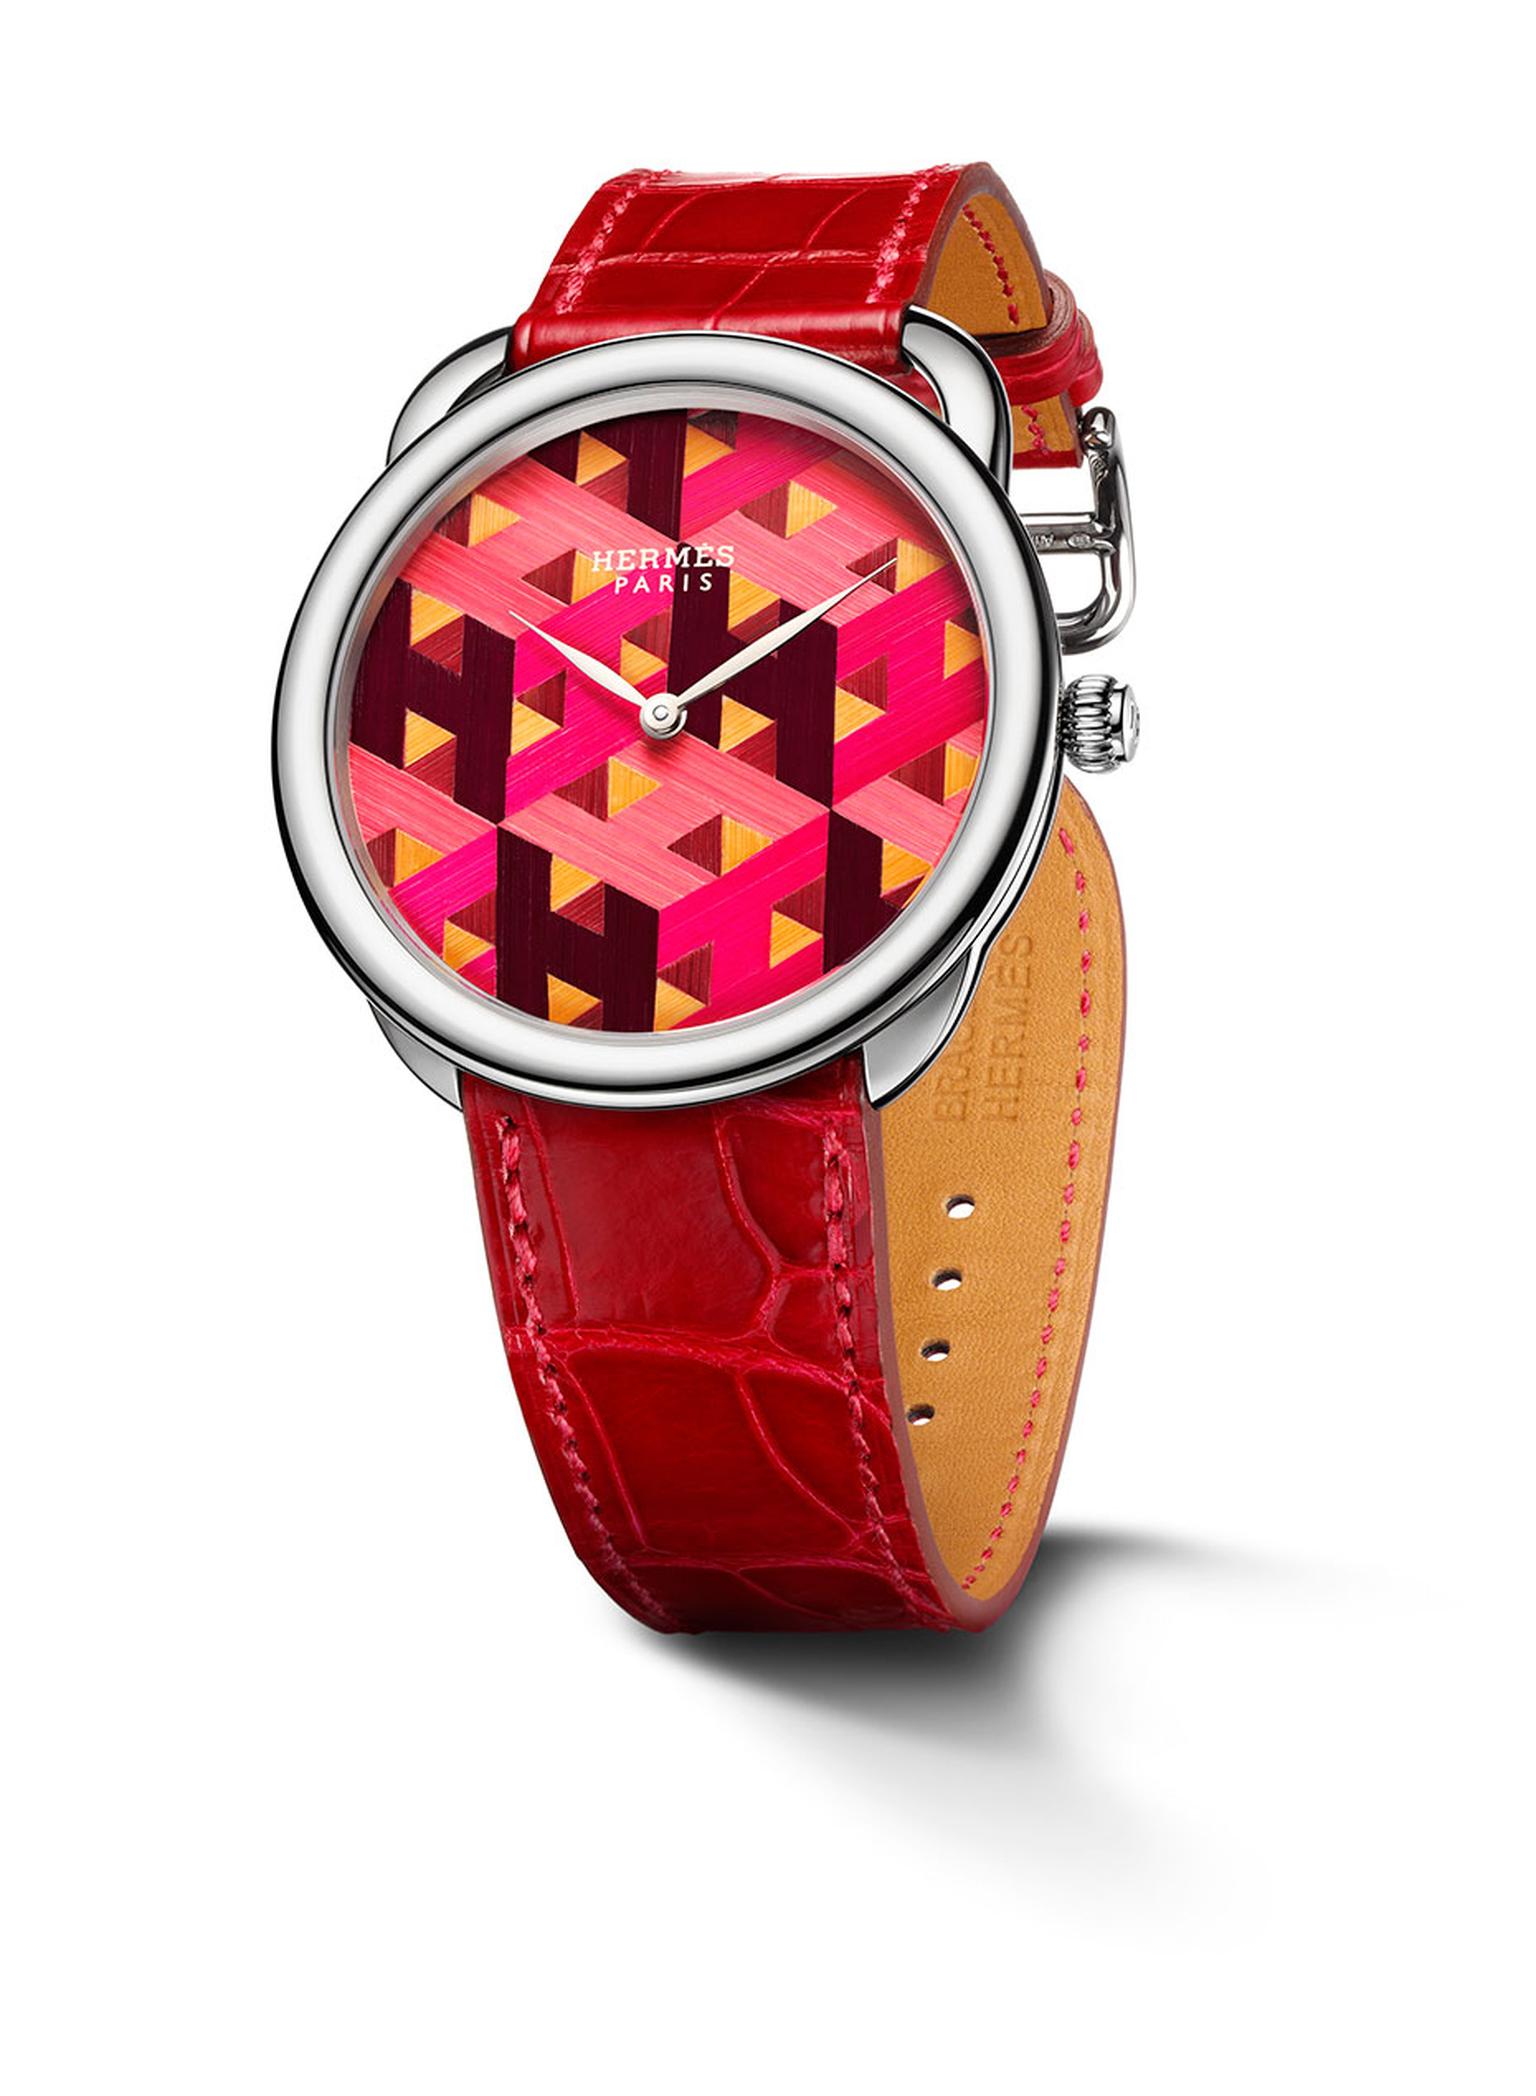 The Hermès Arceau H Cube is a limited edition of 10 and features a dial made entirely of straw marquetry